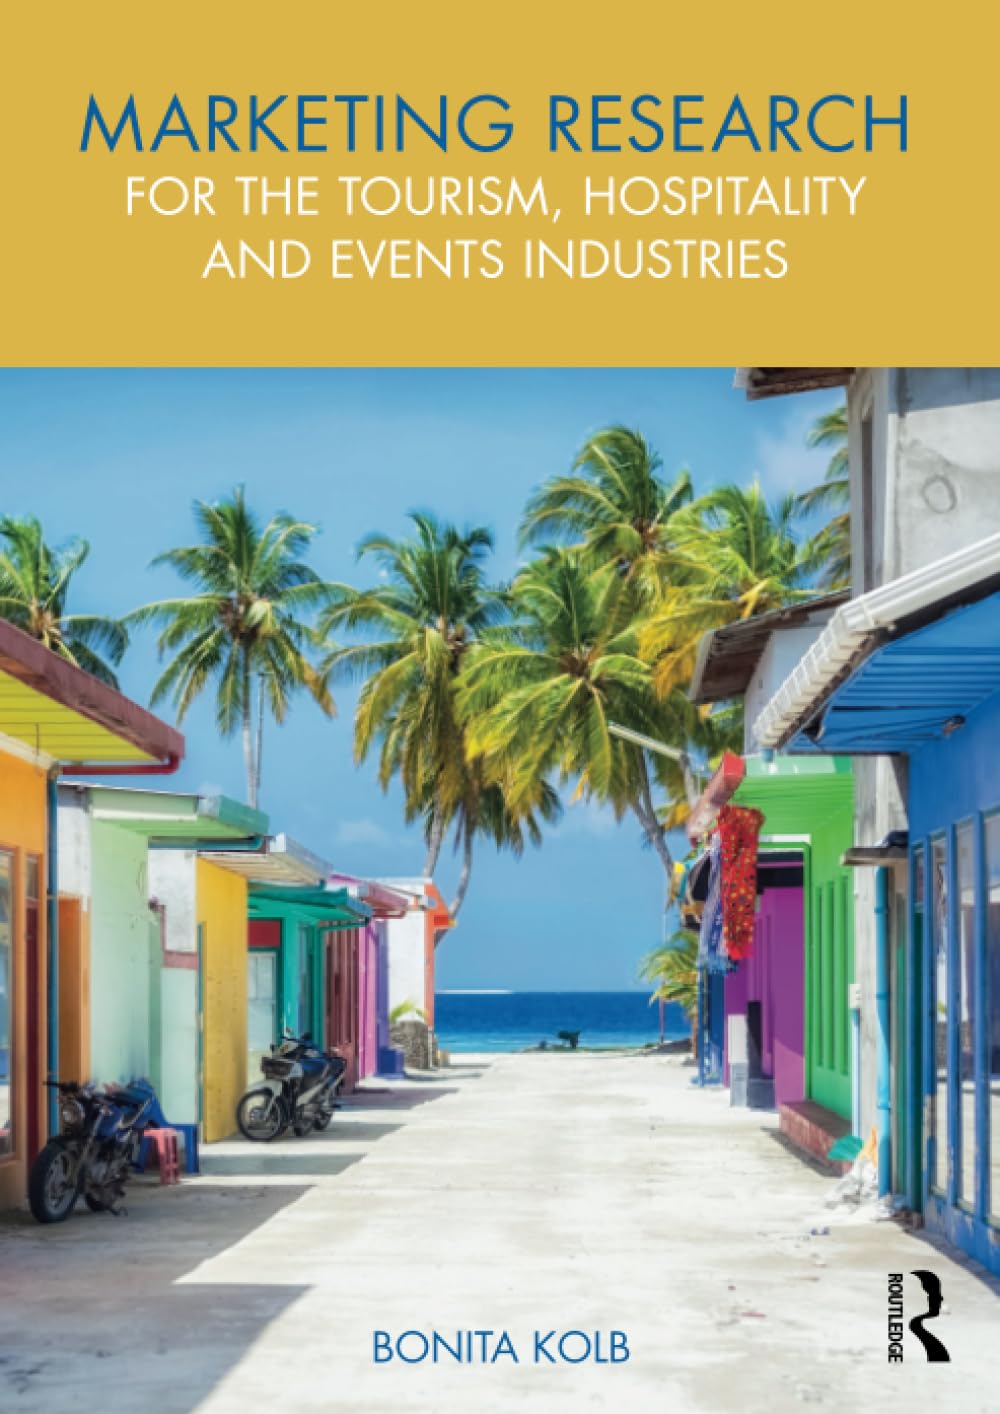 Marketing research for the tourism, hospitality and events industries